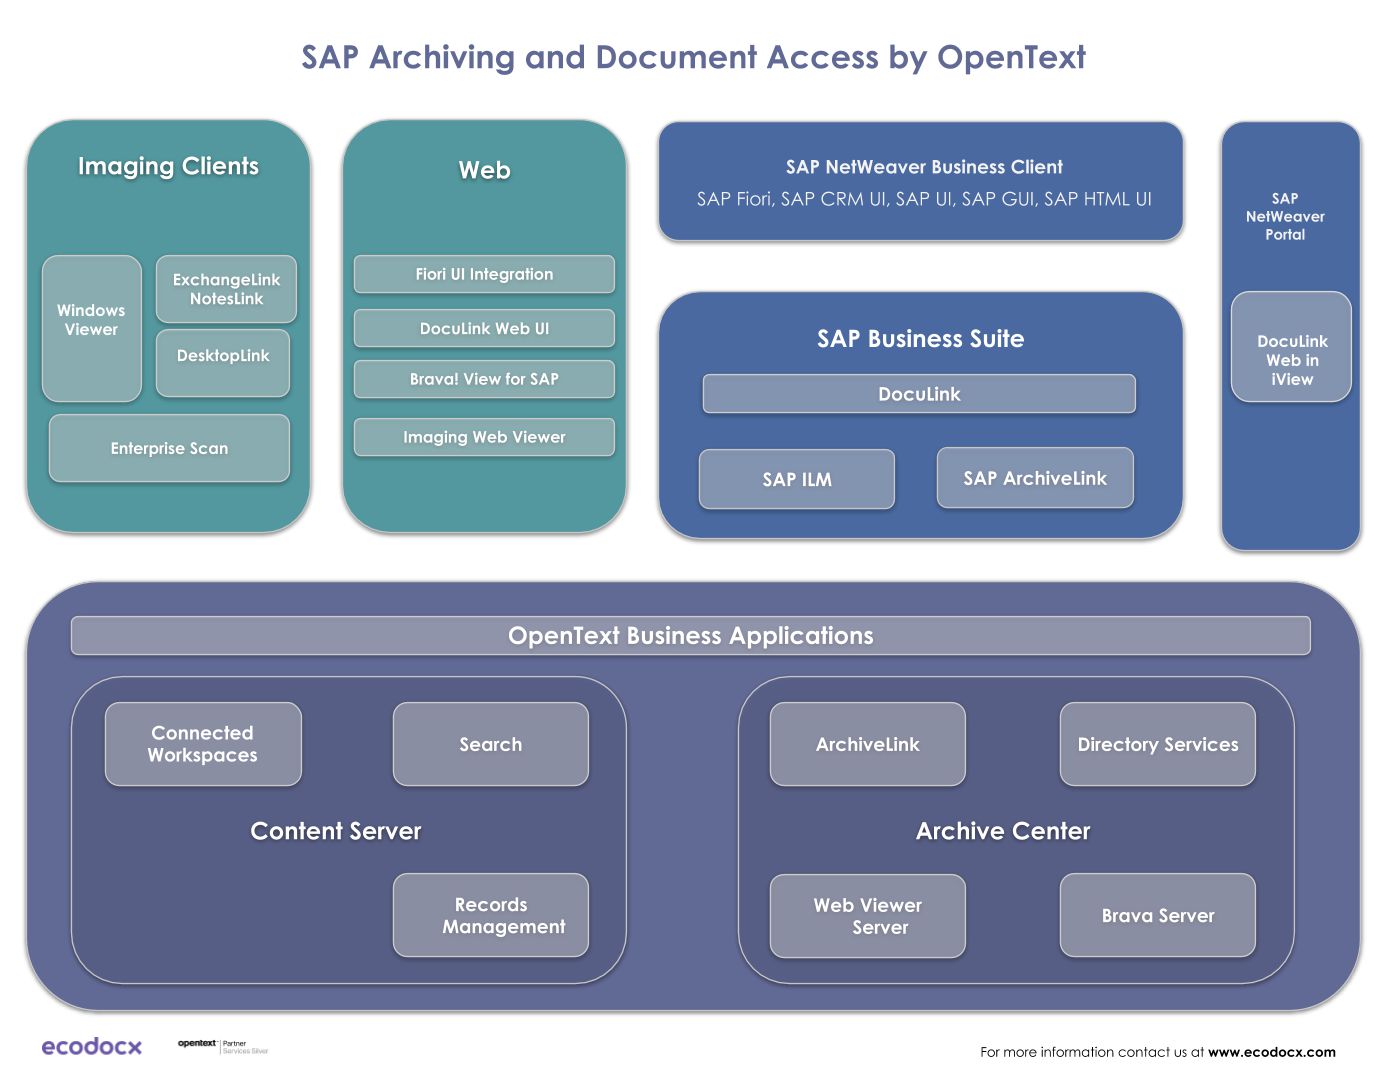 opentext archiving and document access solution architecture conmponents